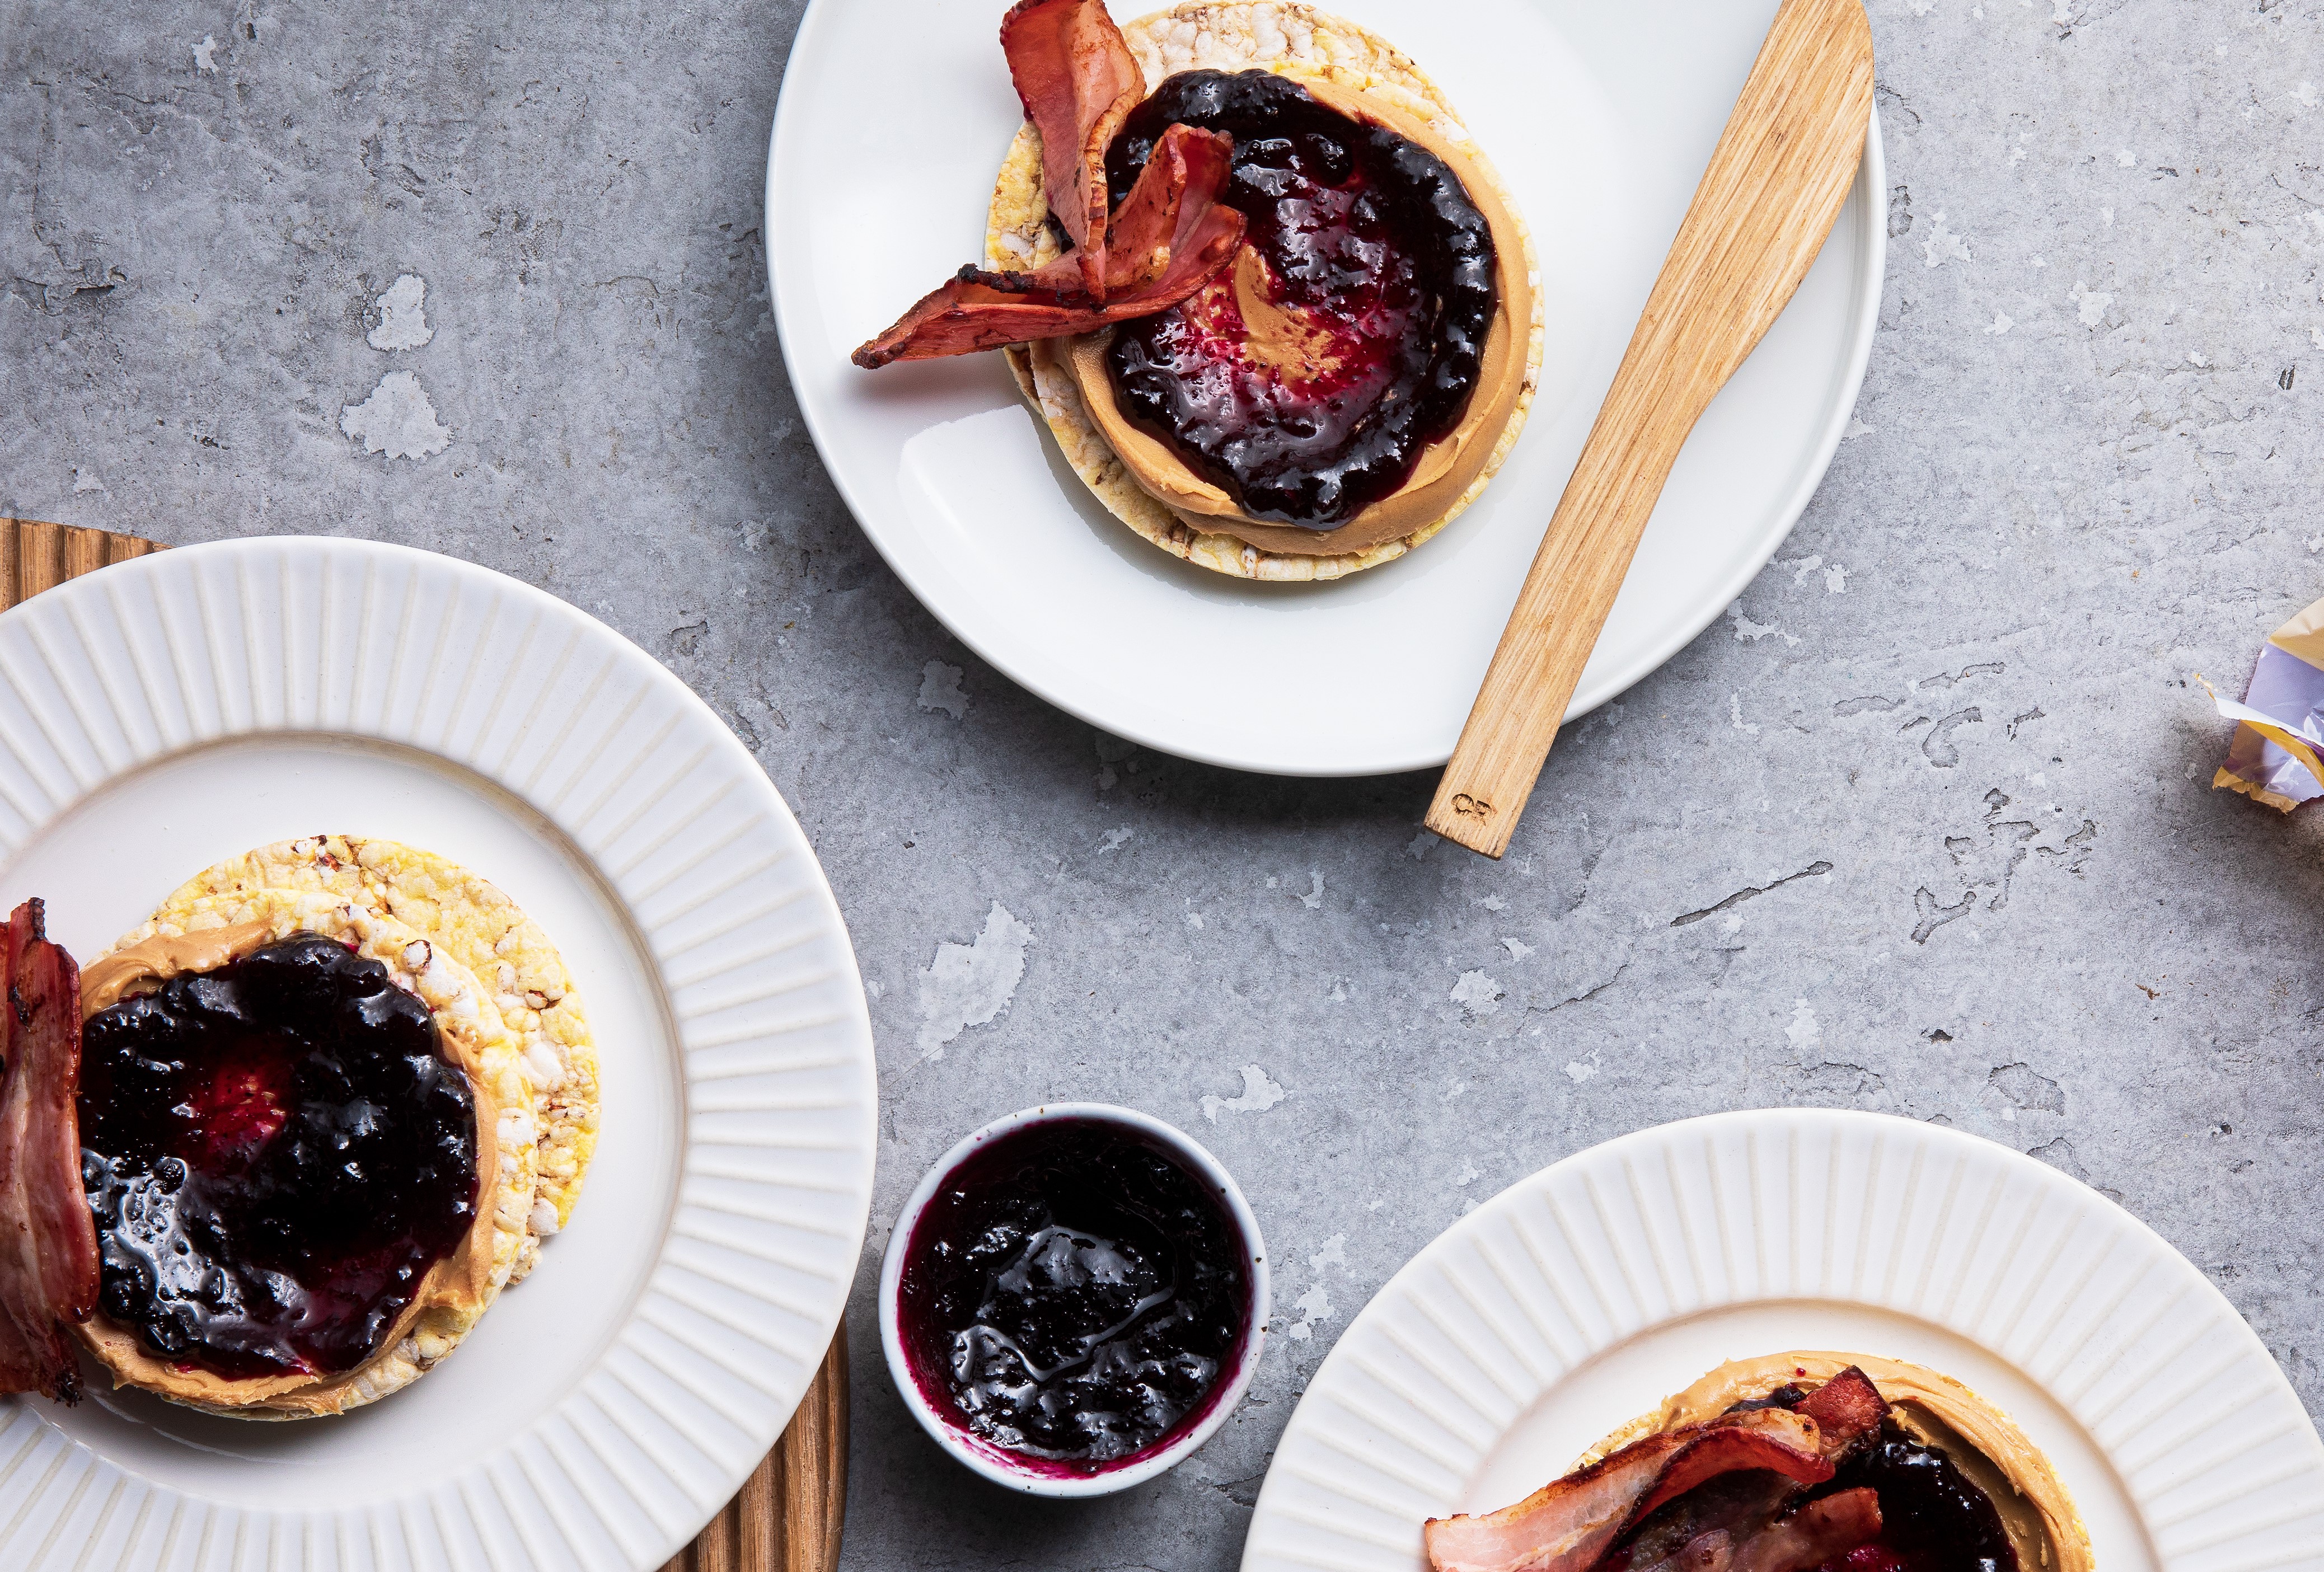 Peanut Butter, Blueberry Conserve & Bacon on Corn Thins slices